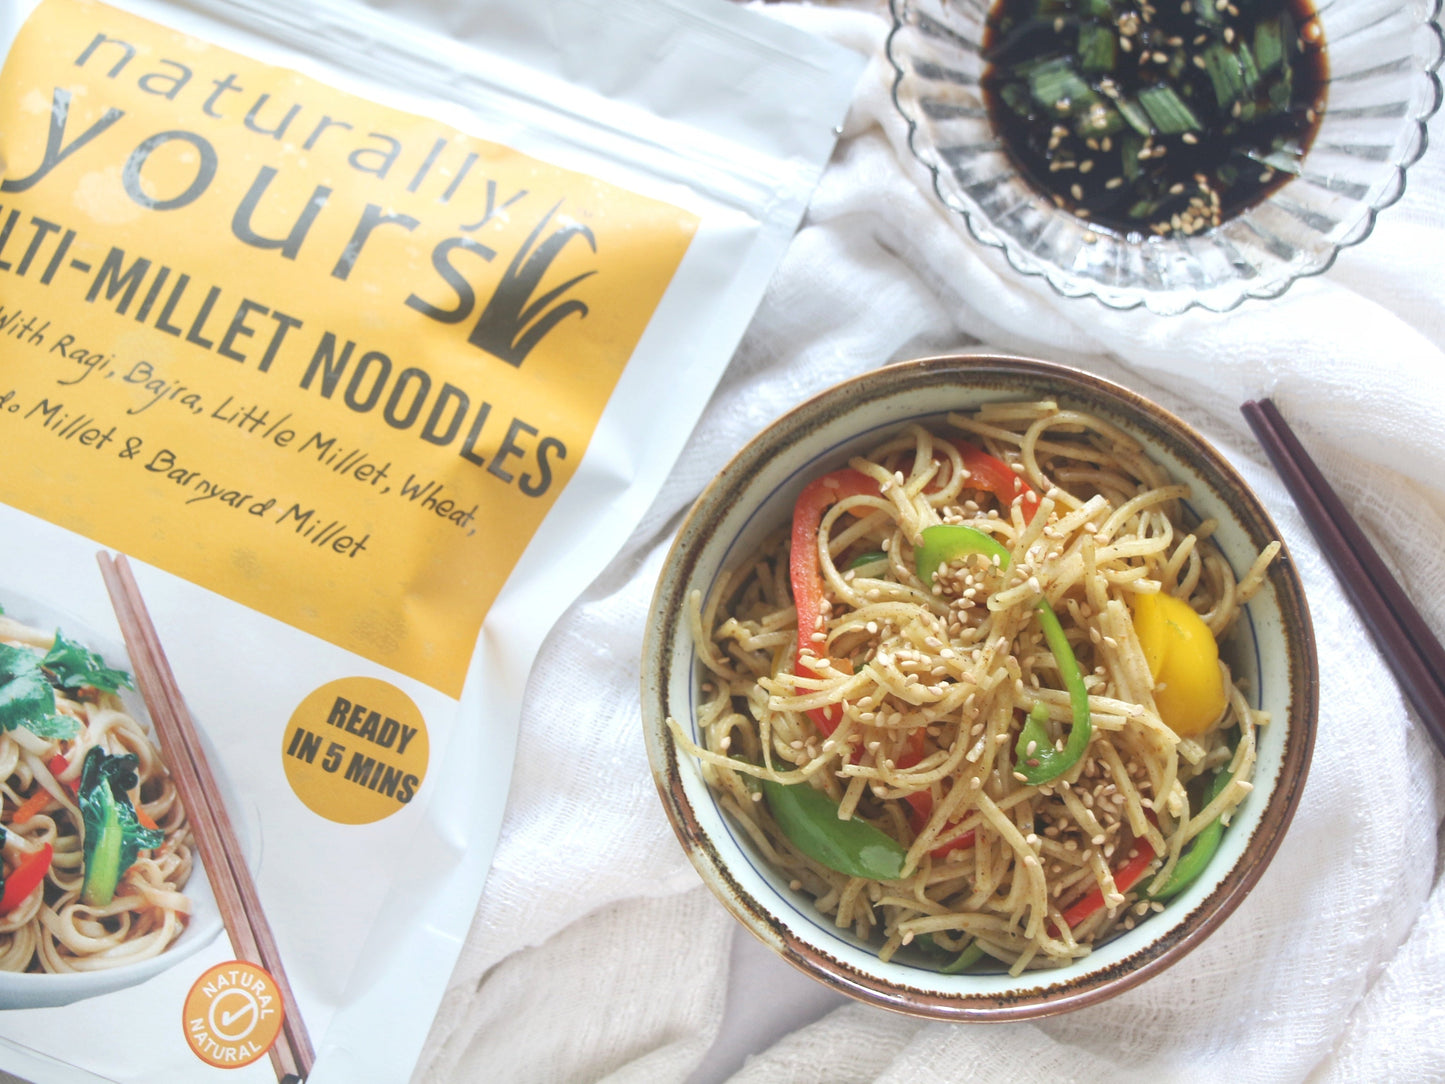 Naturally Yours Multi-Millet Noodles, 180 Gm